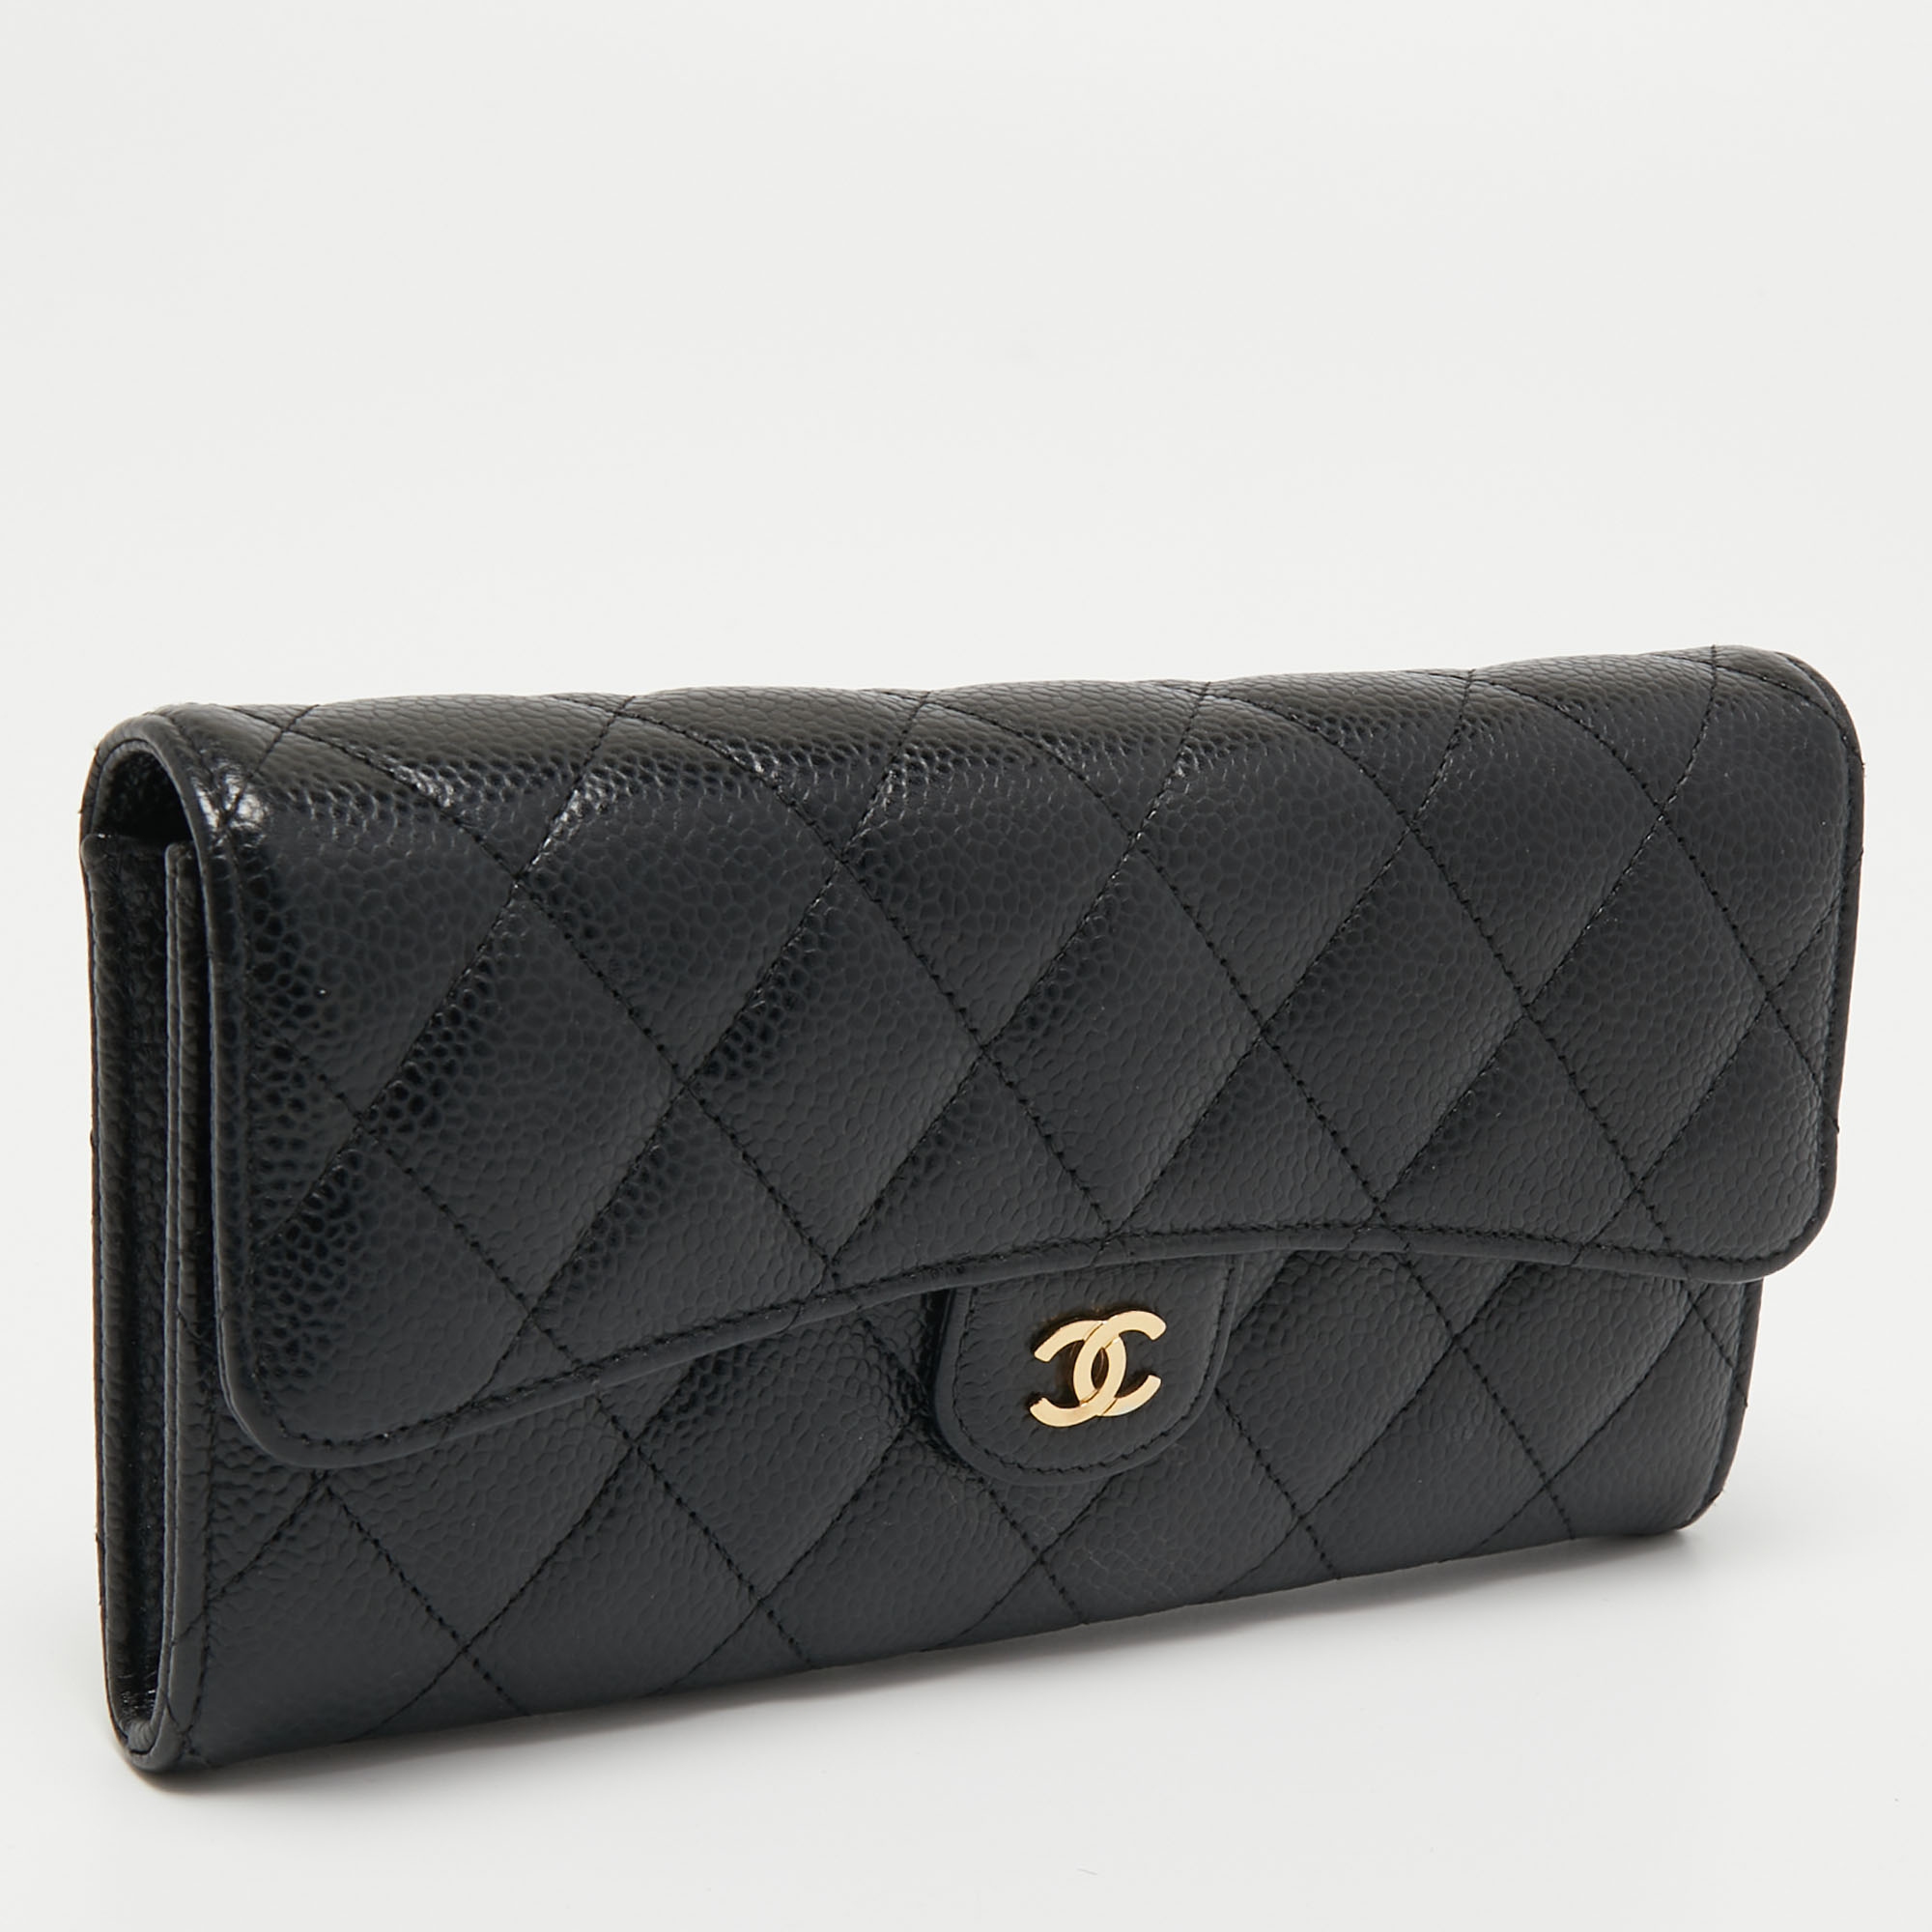 

Chanel Black Quilted Caviar Leather Gusset Flap Wallet